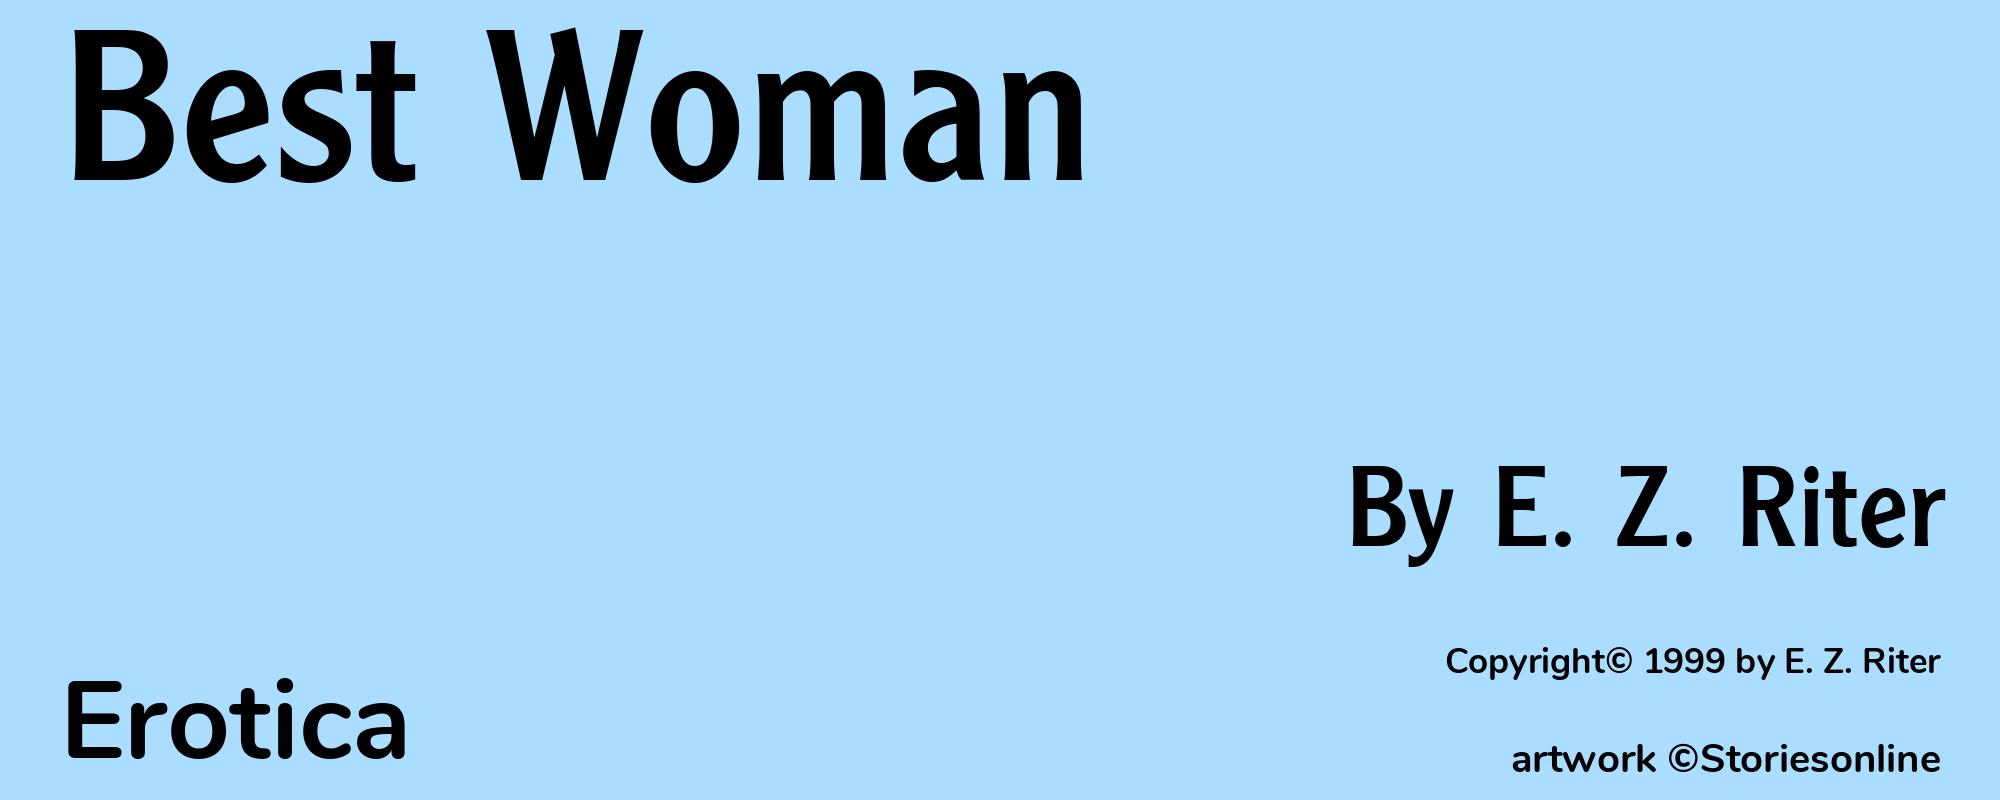 Best Woman - Cover